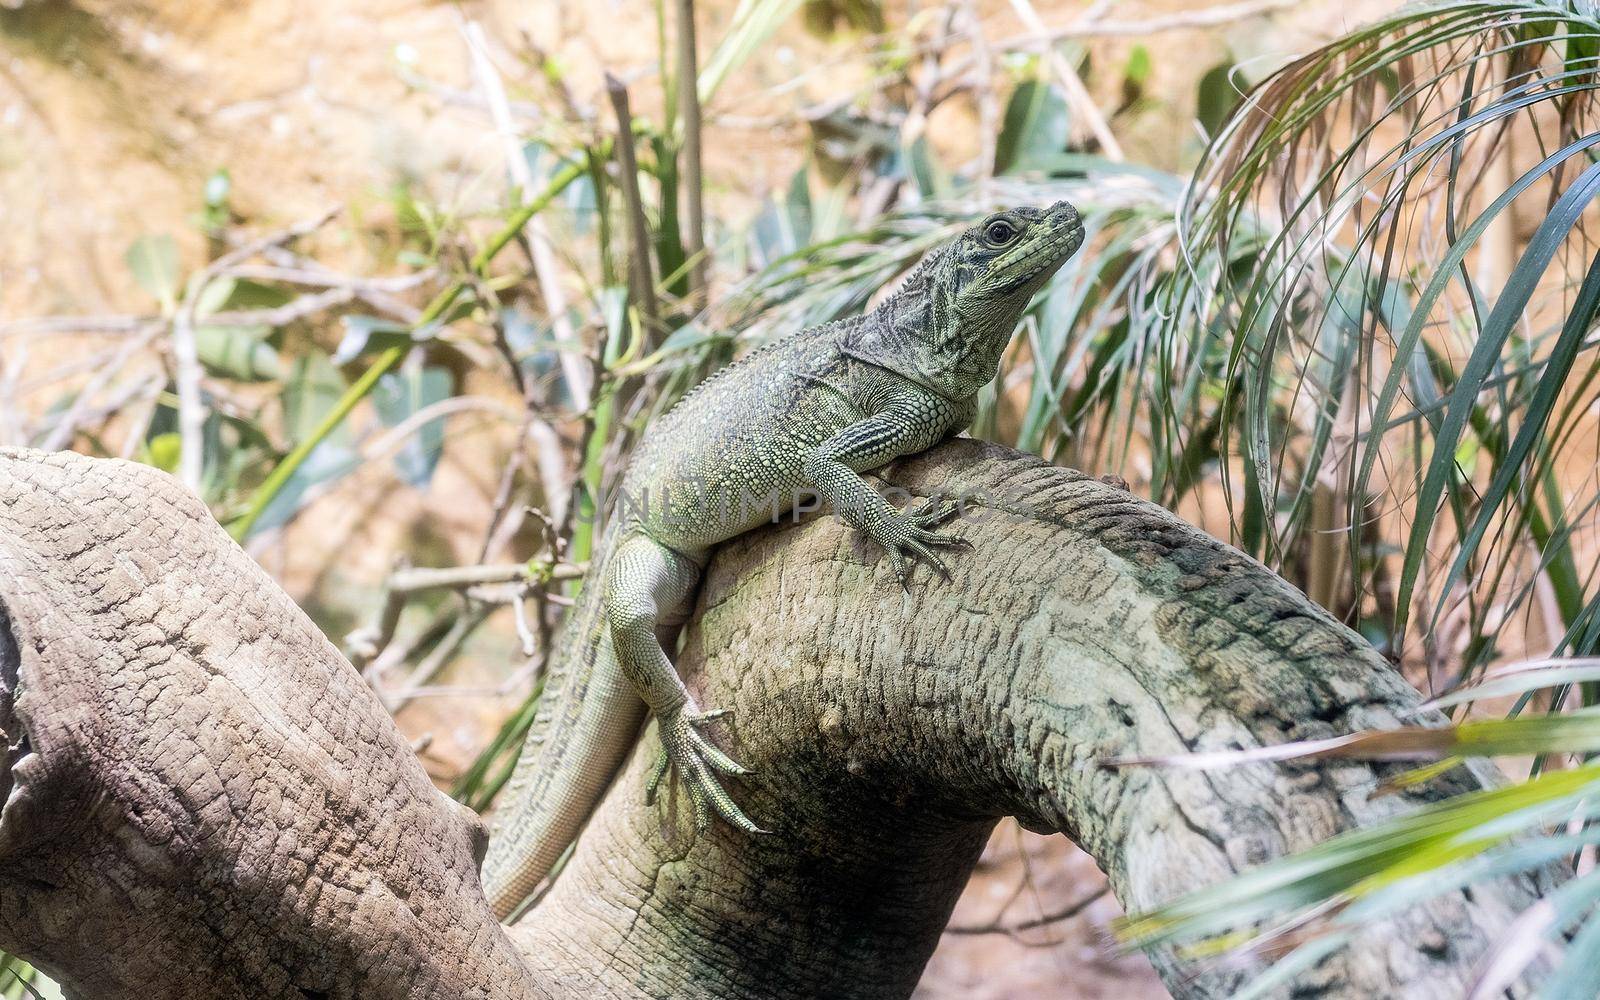 Common green iguana resting on a tree trunk in tropical environment by marcorubino